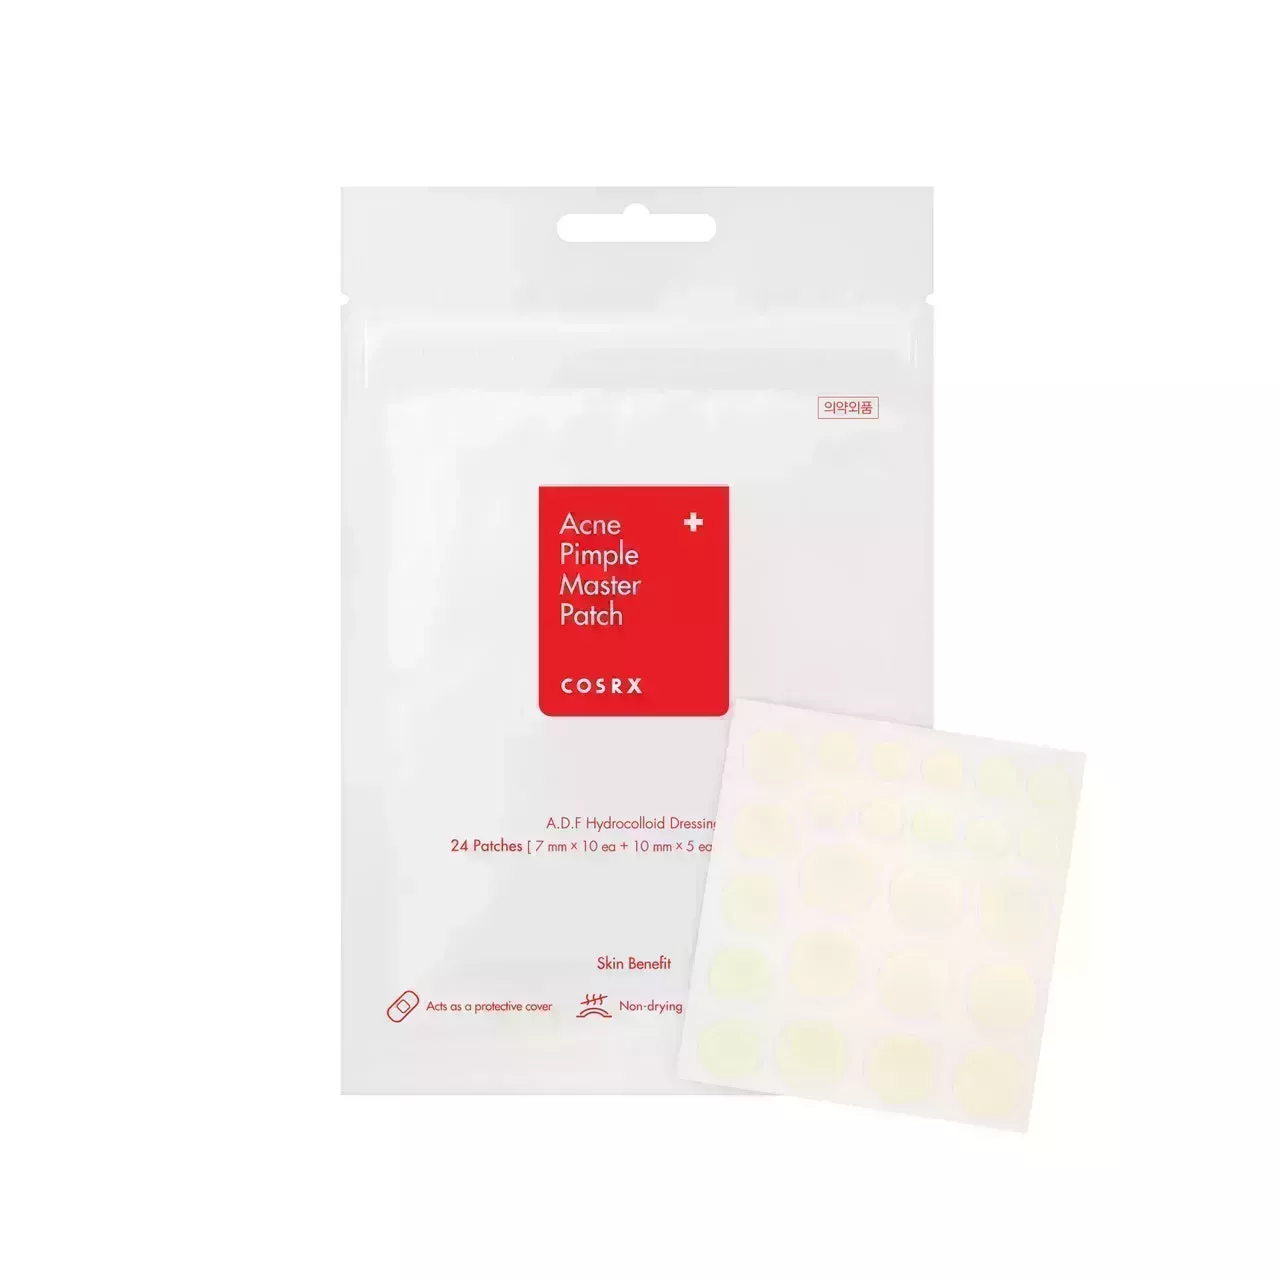 Cosrx Acne Pimple Master Patches on a white background